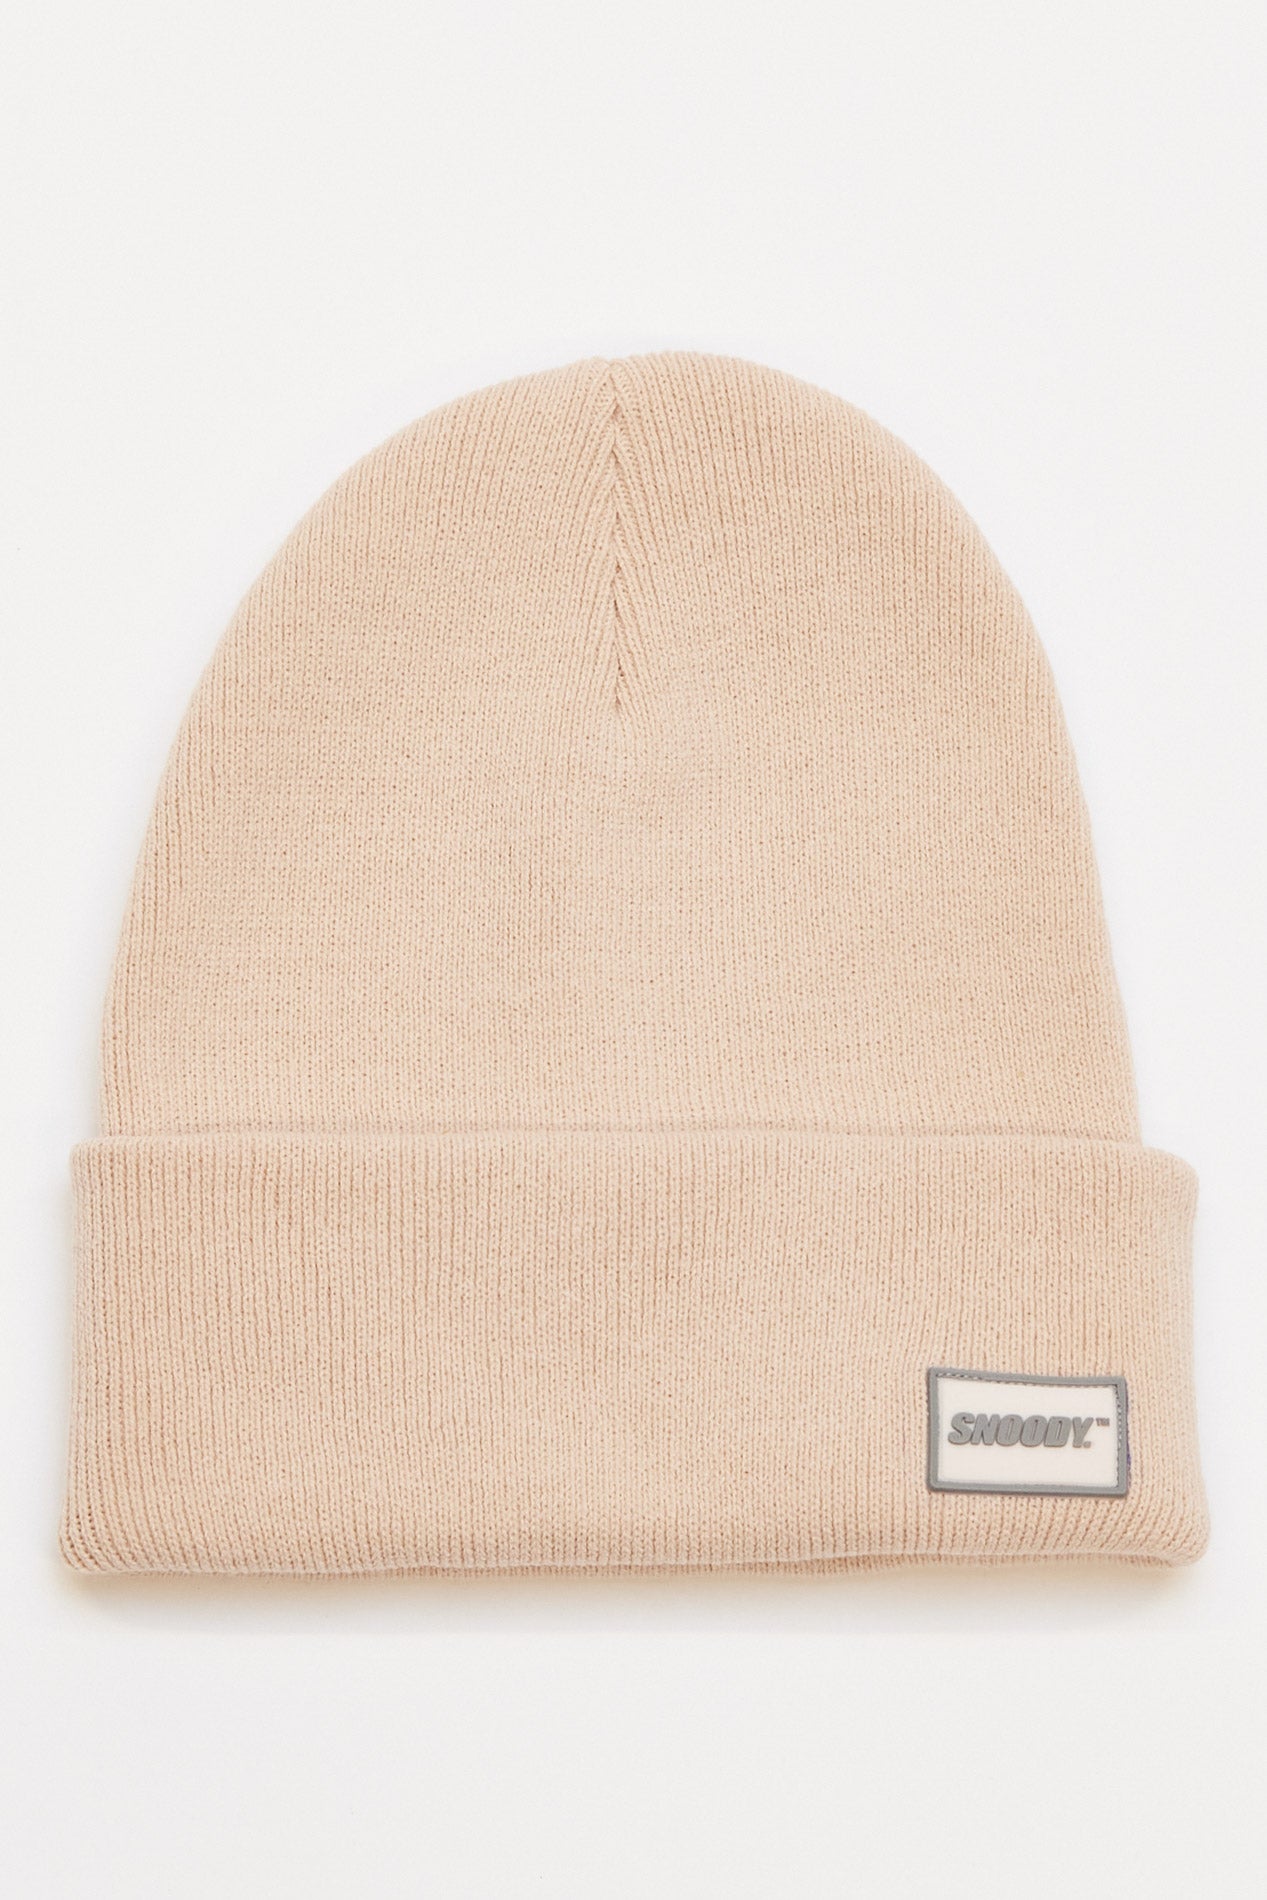 THE BEANIE - PINK